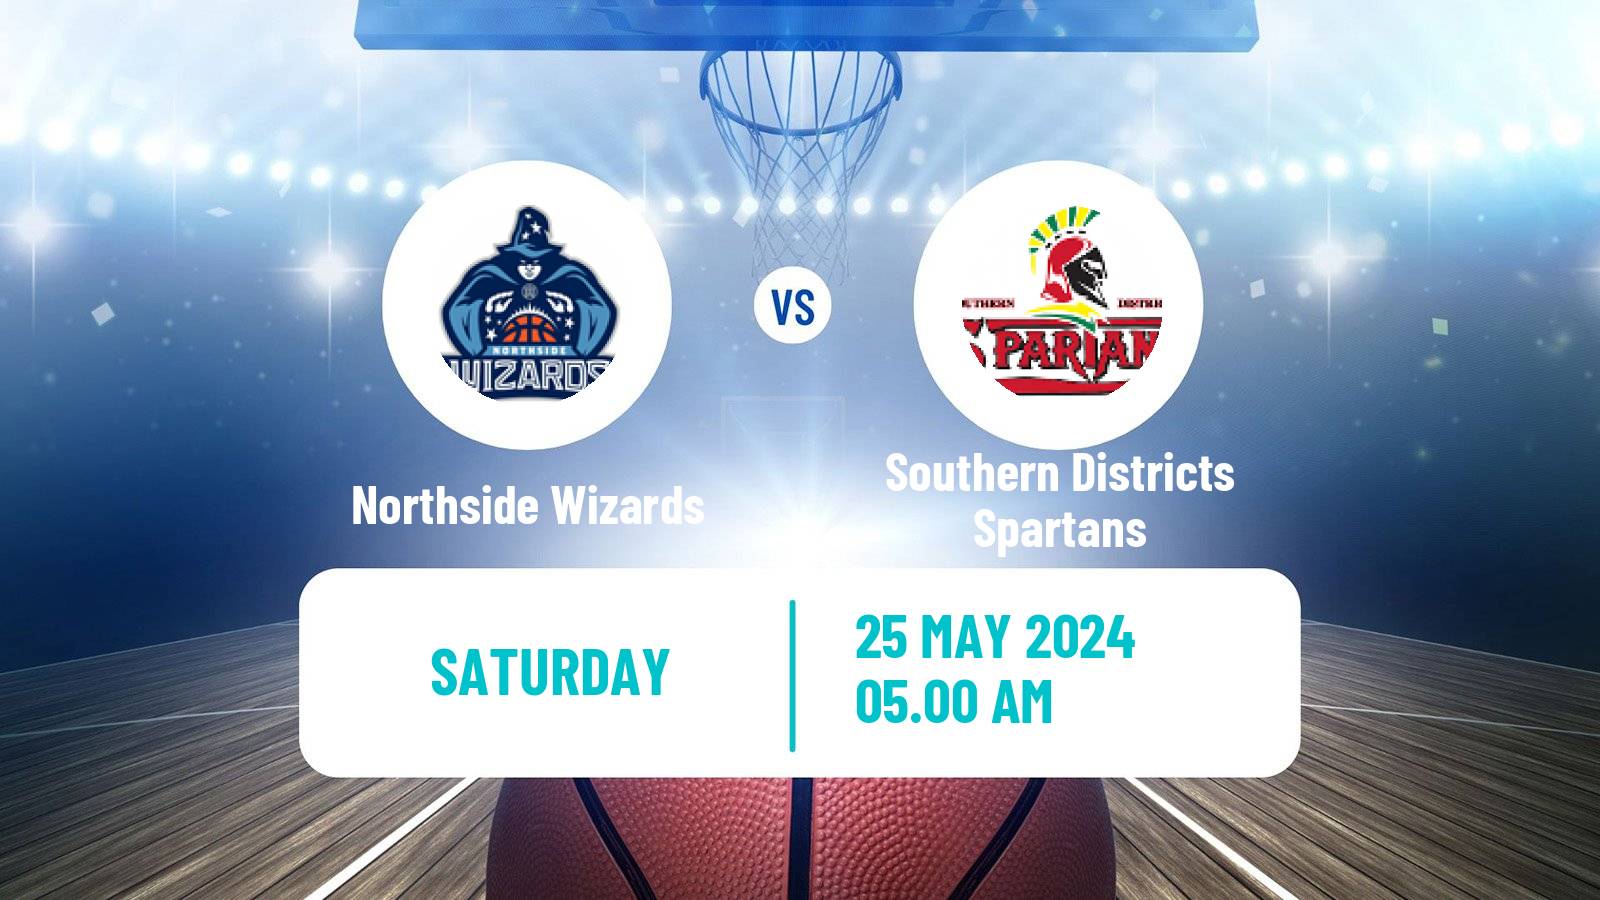 Basketball Australian NBL1 North Northside Wizards - Southern Districts Spartans